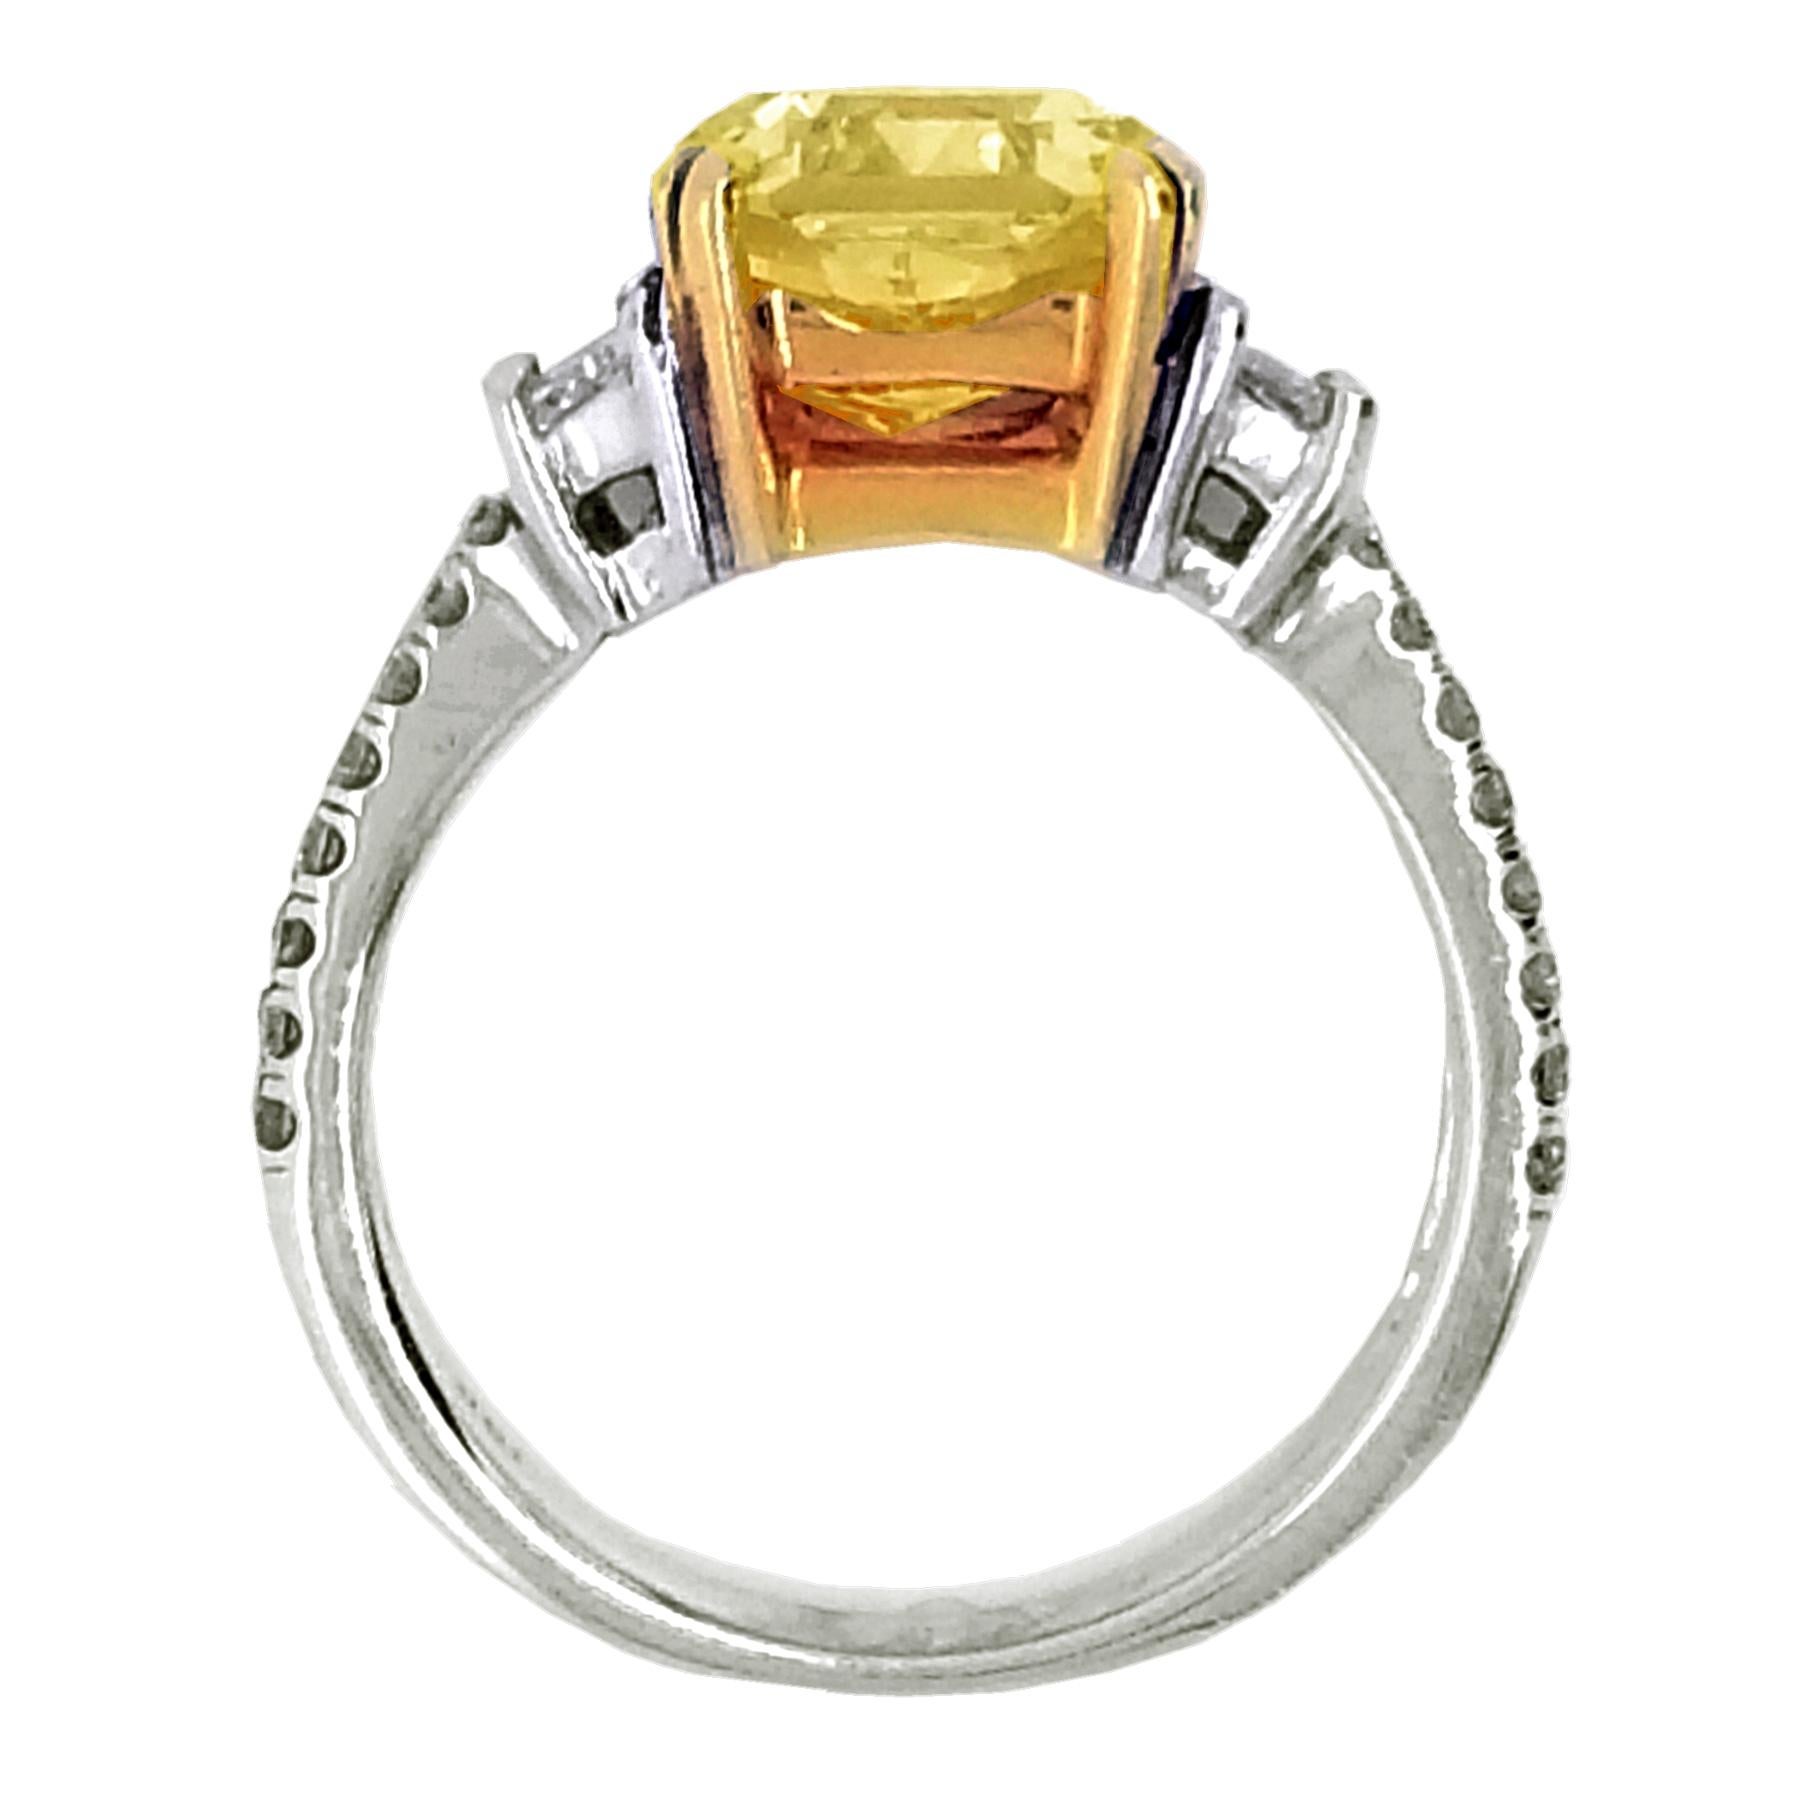 Radiant Cut GIA 3.06 Ct Fancy Intense Yellow Radiant 18K Engagement Ring with 2 Traps